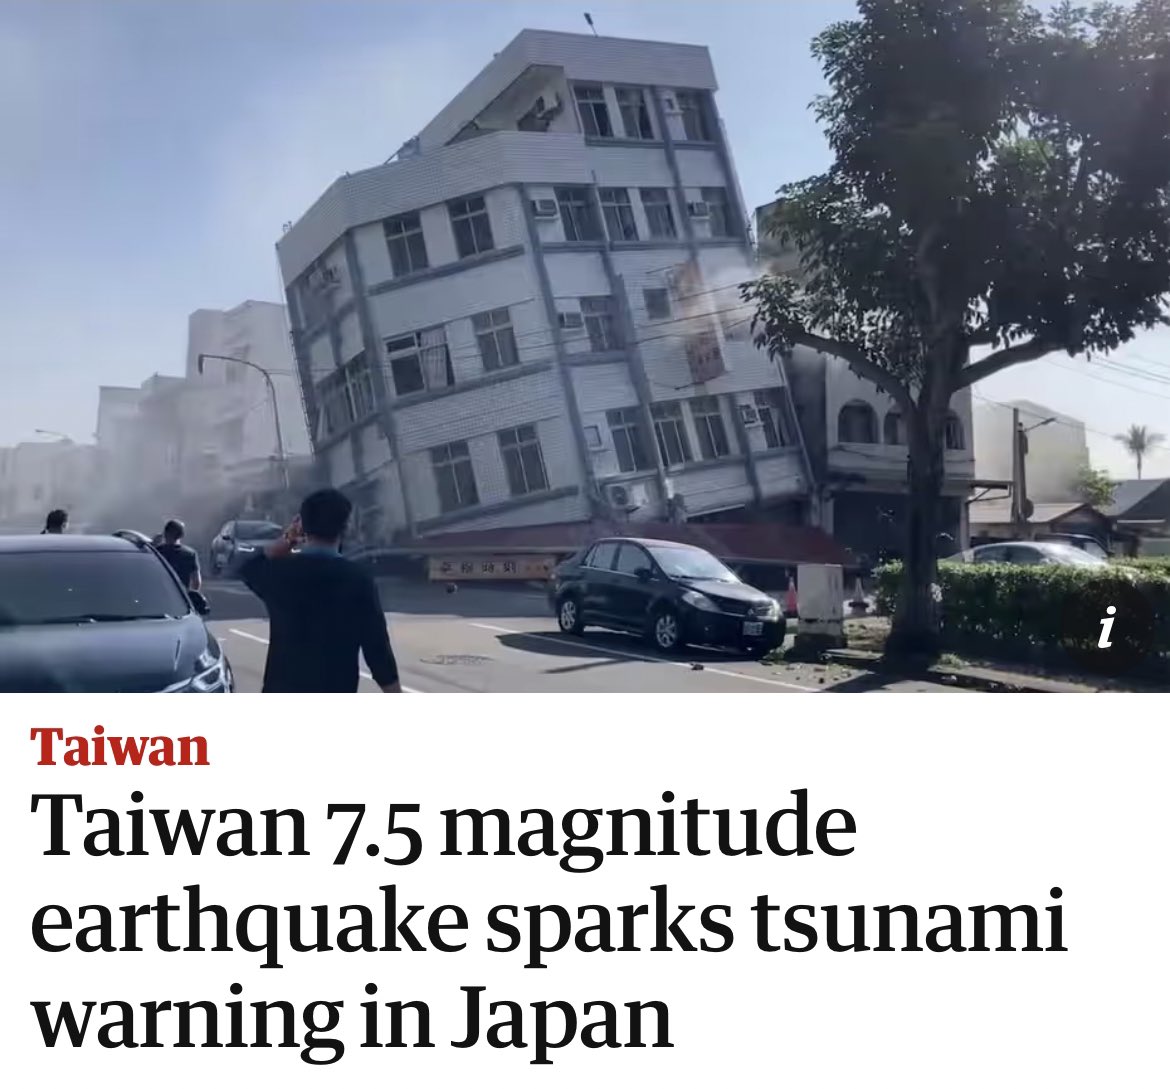 My wife and I are currently on vacation in Taiwan. Being from Canada, I have never experienced an #earthquake before. I believe we experienced a 4.0 in Taipei and I am still shook. Thoughts and prayers to everyone in Hualien.